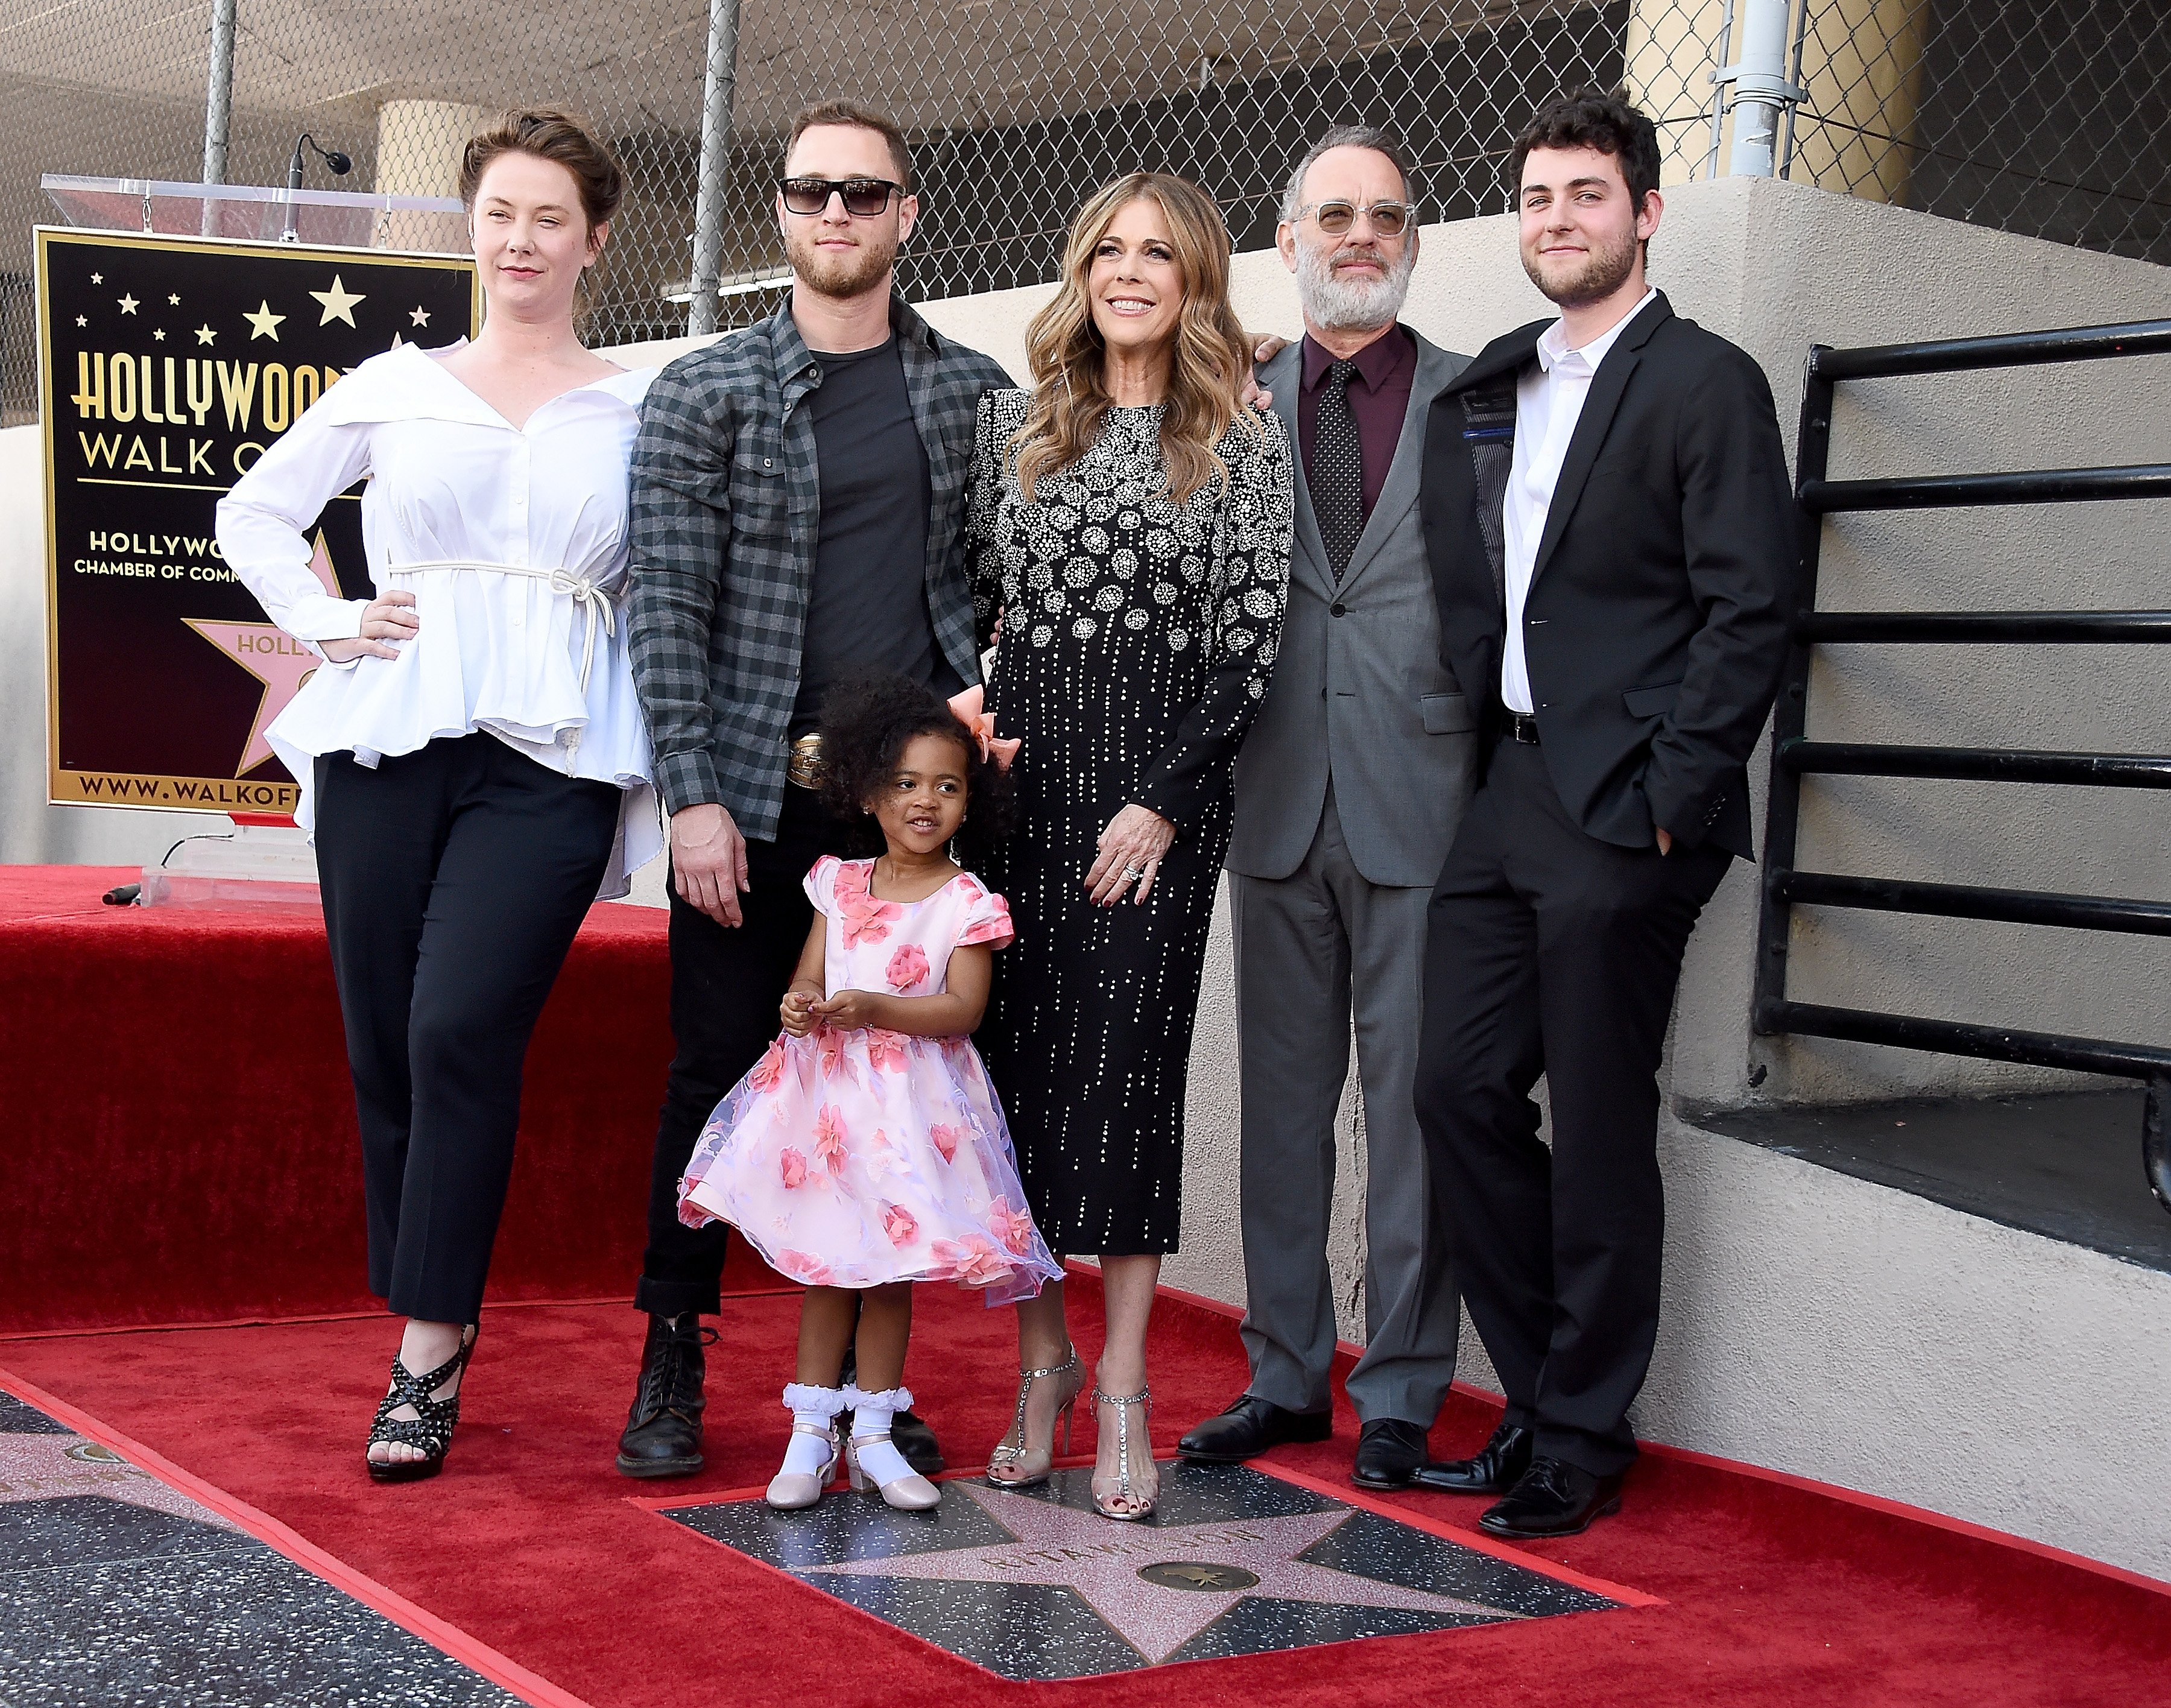 Rita Wilson and Tom Hanks pose with their family as Rita receives a star on the Hollywood Walk of Fame on March 29, 2019 in Hollywood, California.  |  Source: Getty Images